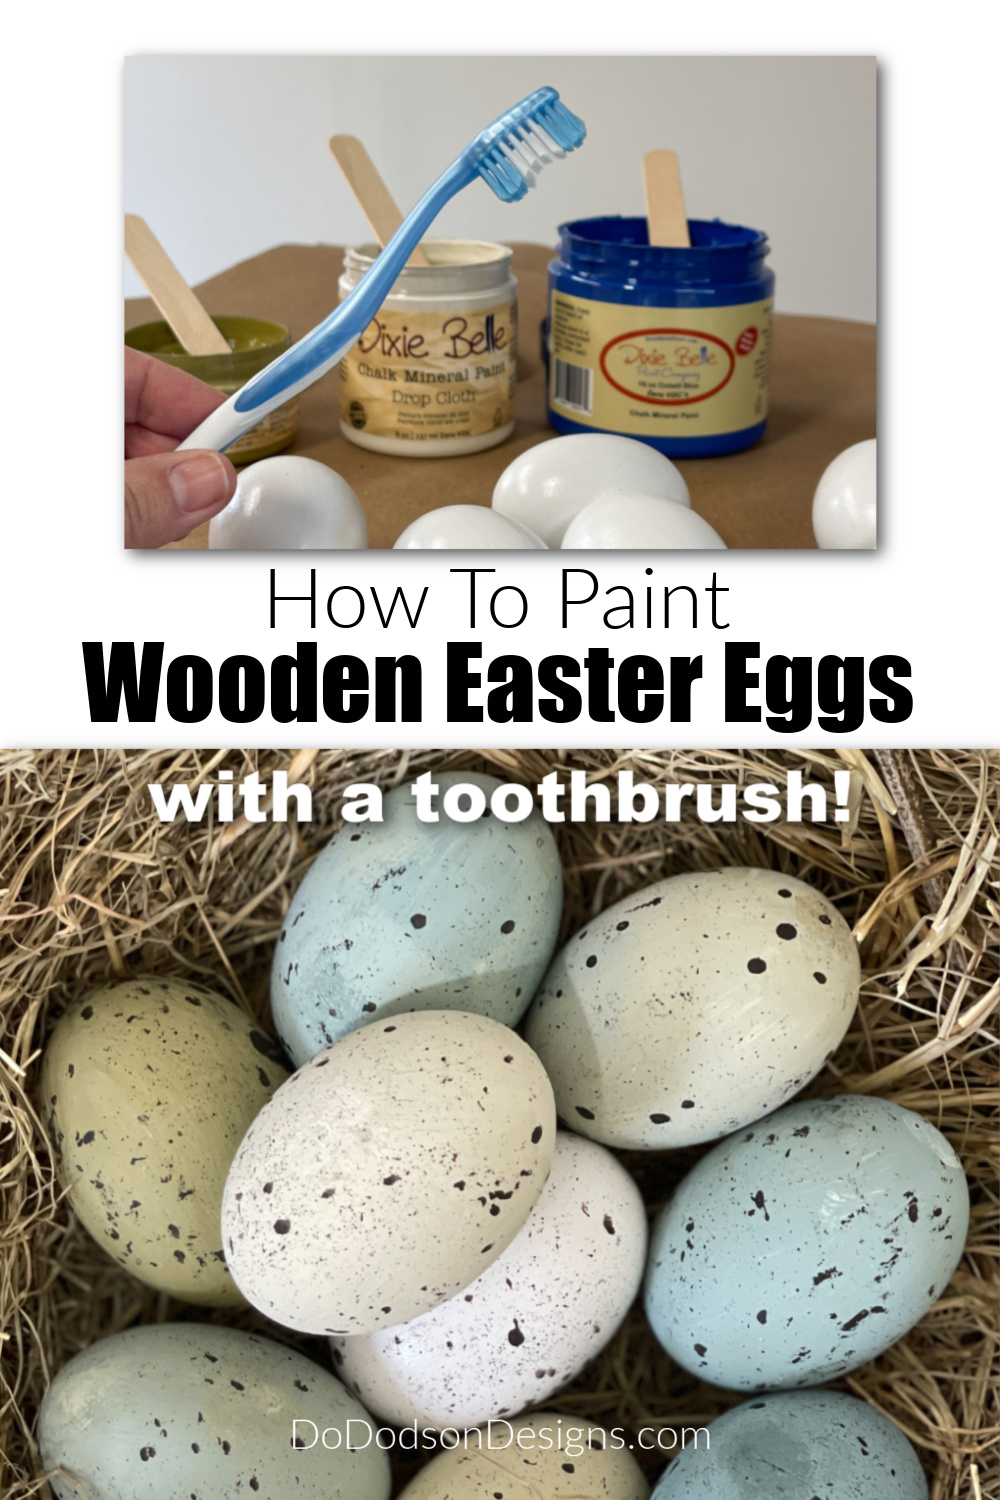 How to Paint Wooden Easter Eggs